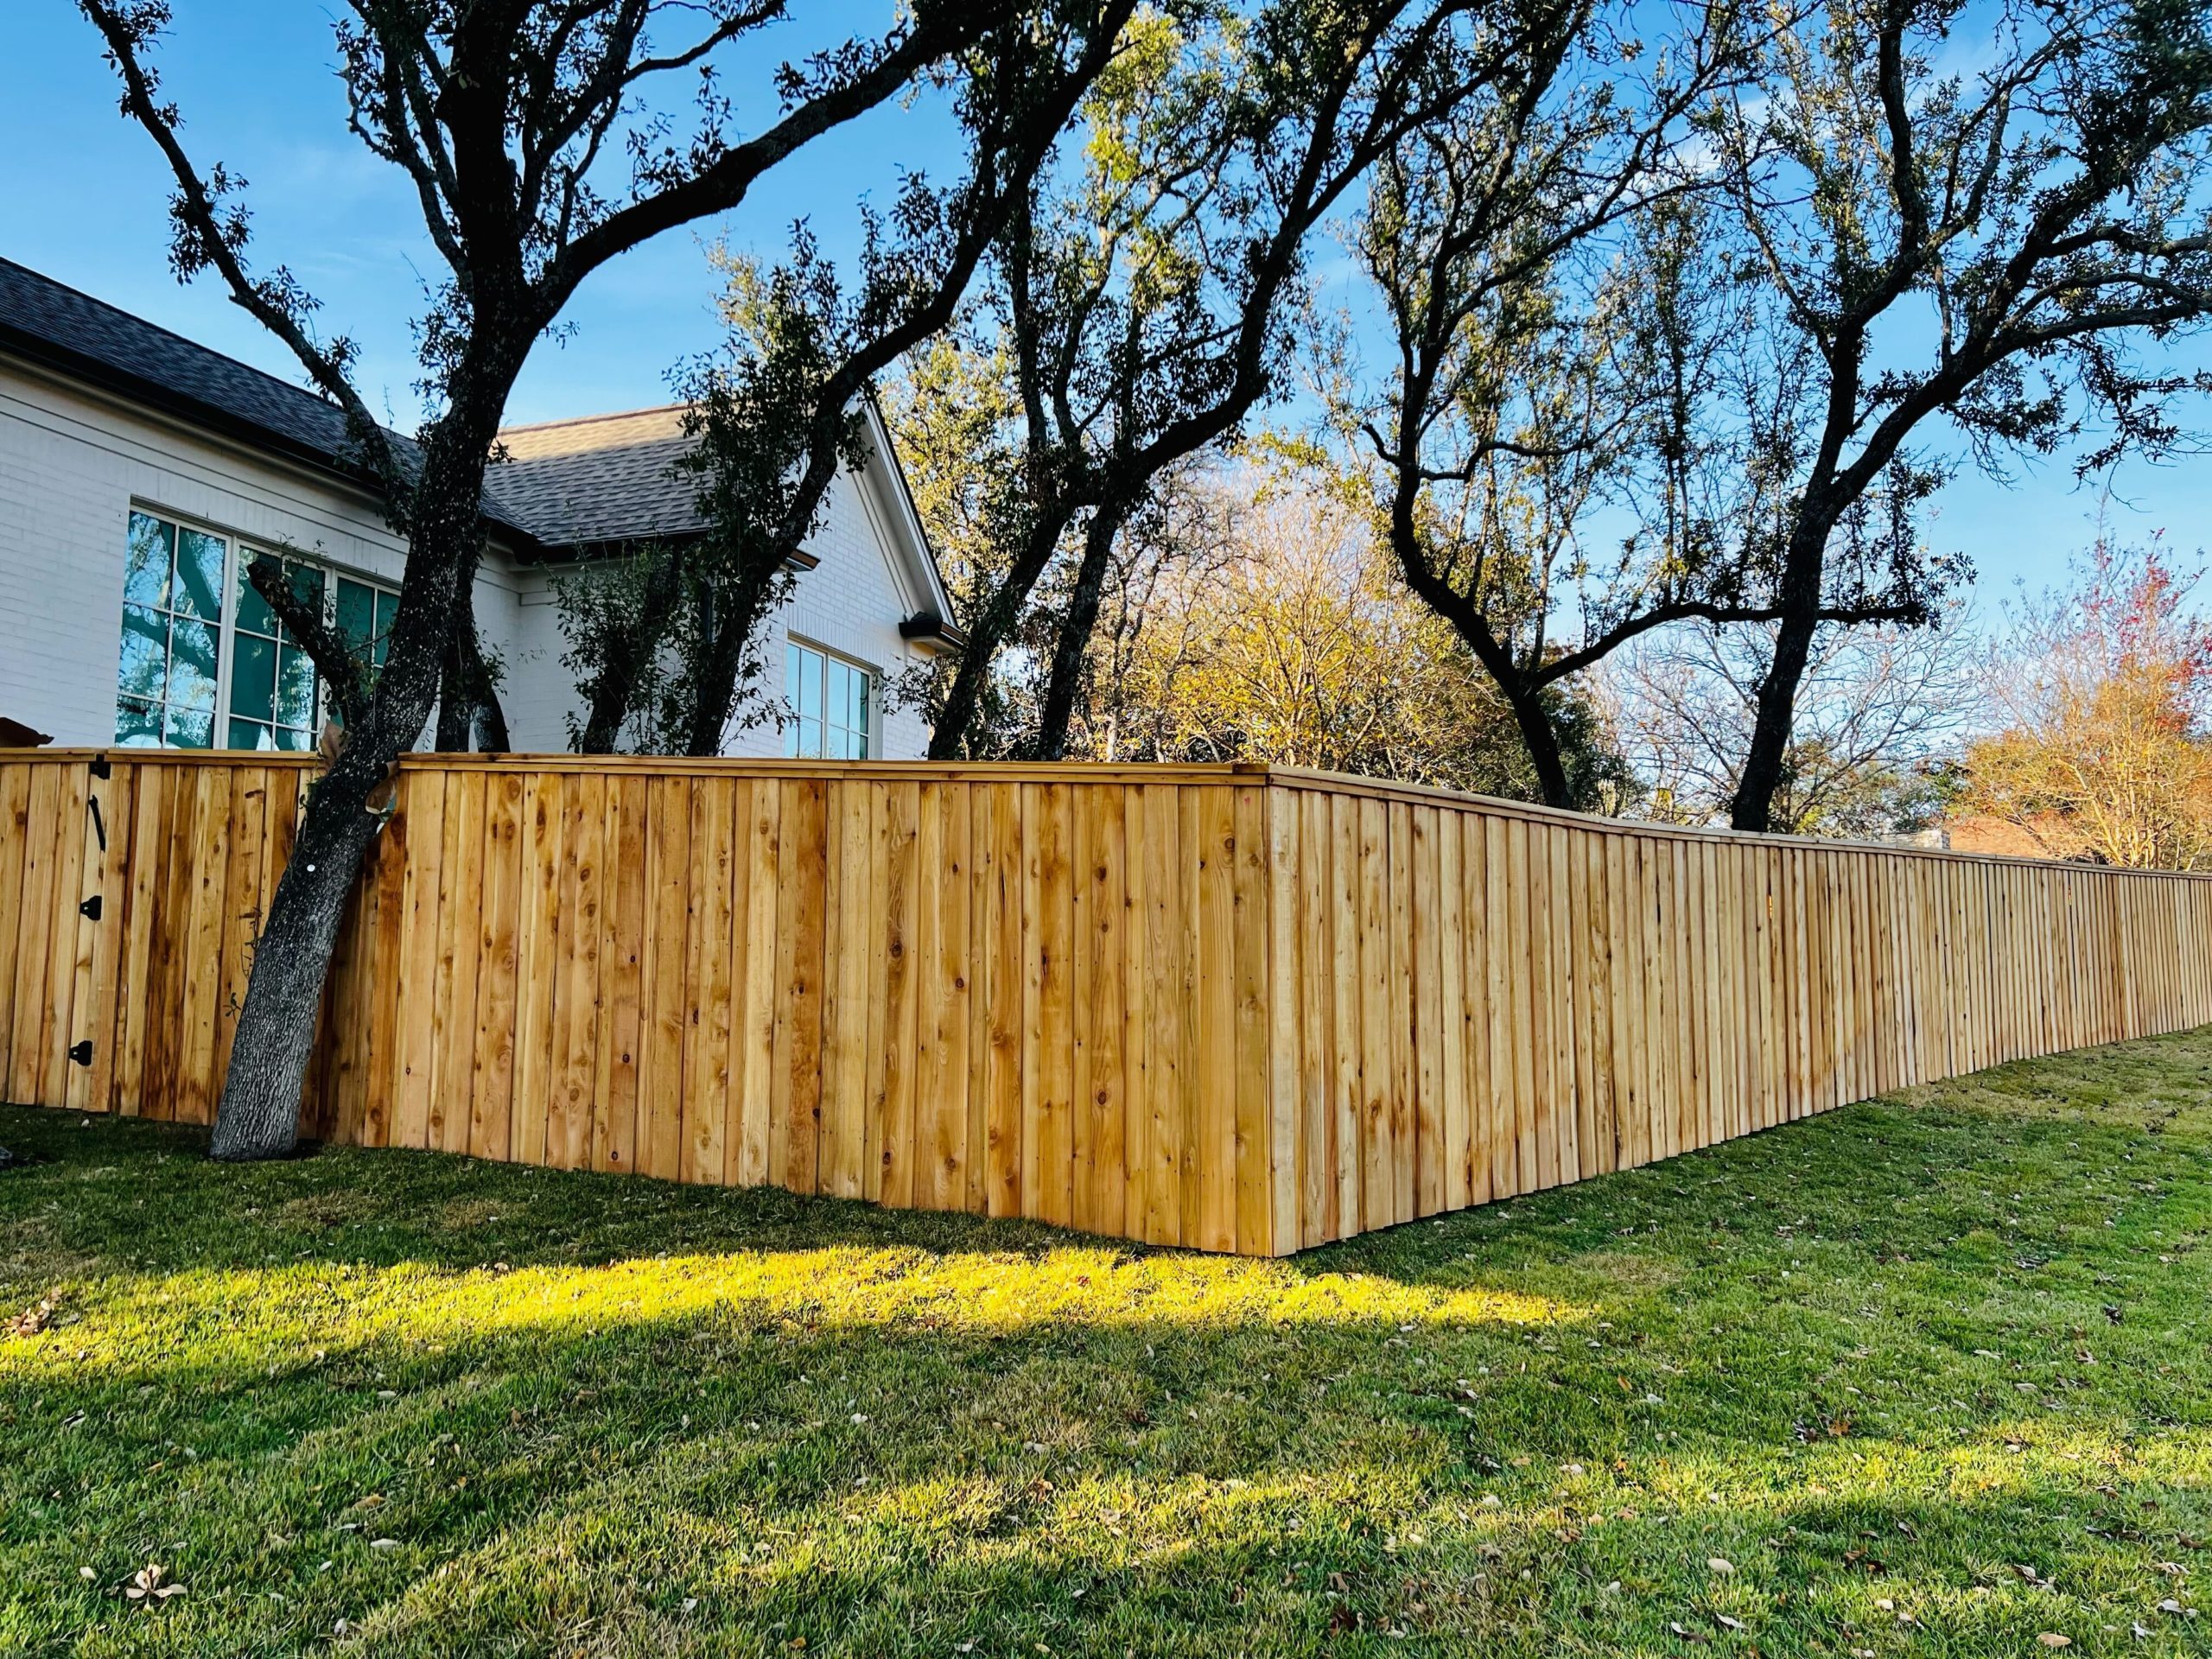 Cedar wood fence in an Austin backyard with trees overlapping the fence